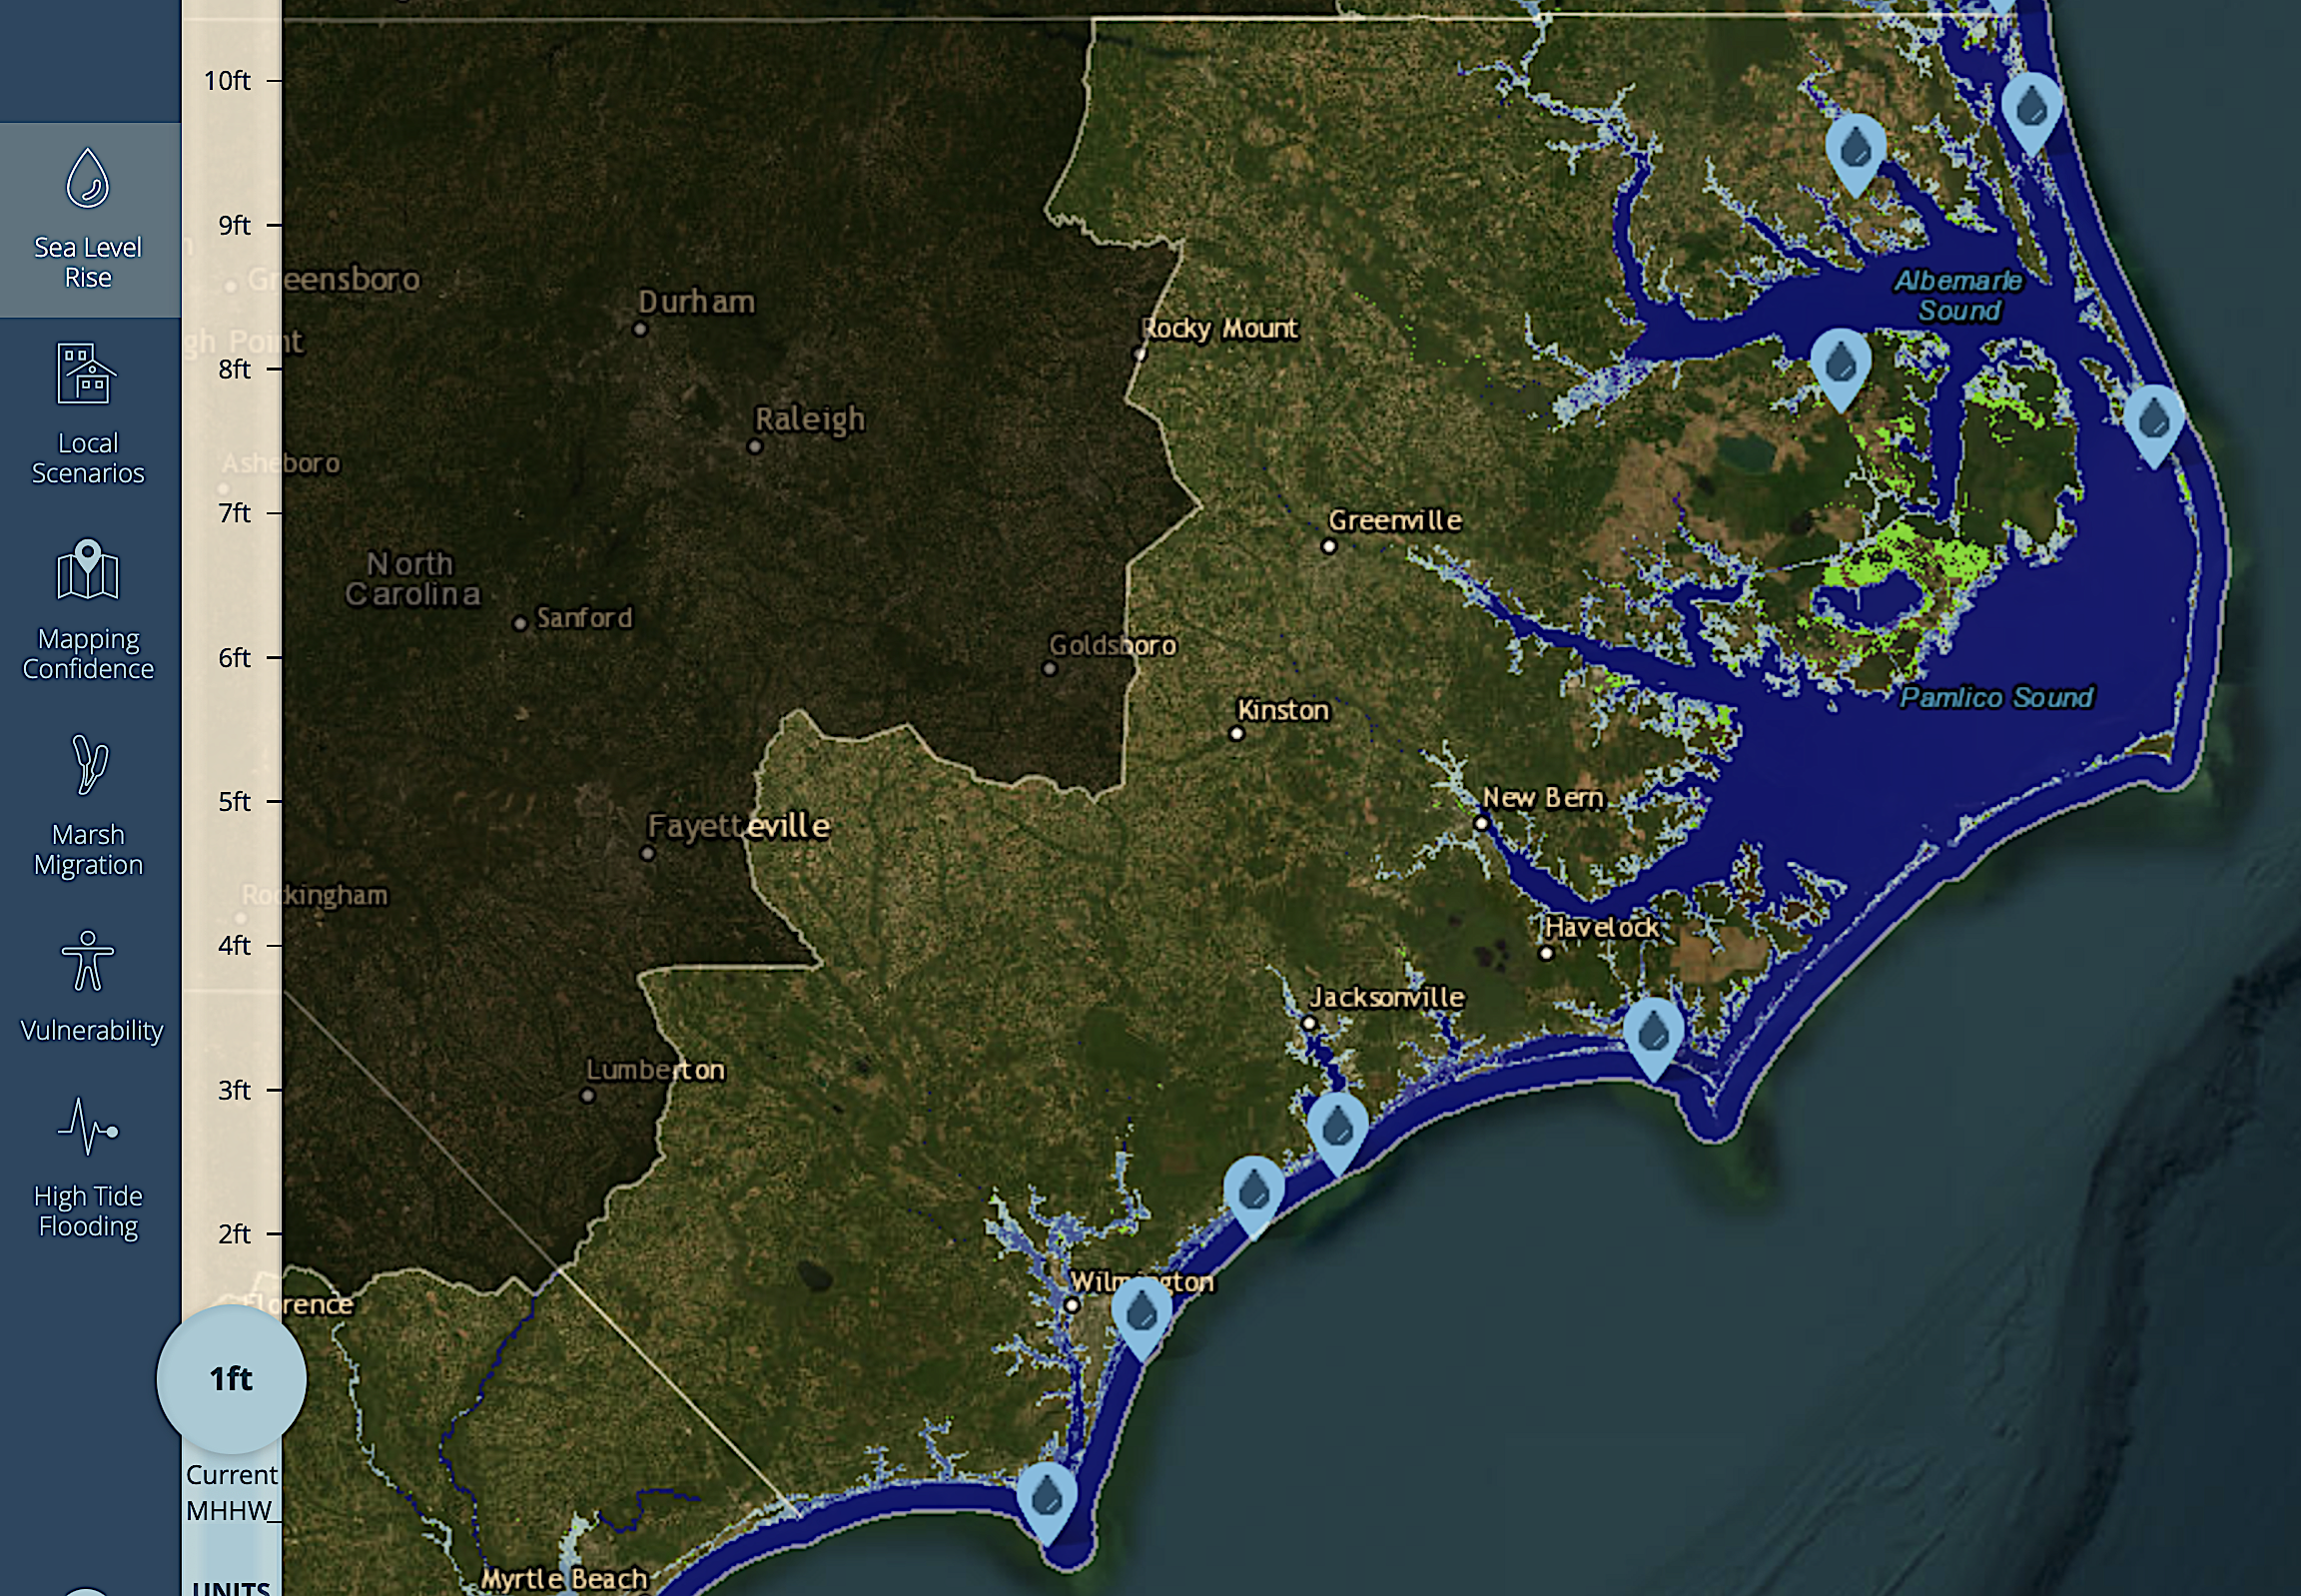 image: still from NOAA's interactive sea level rise map.